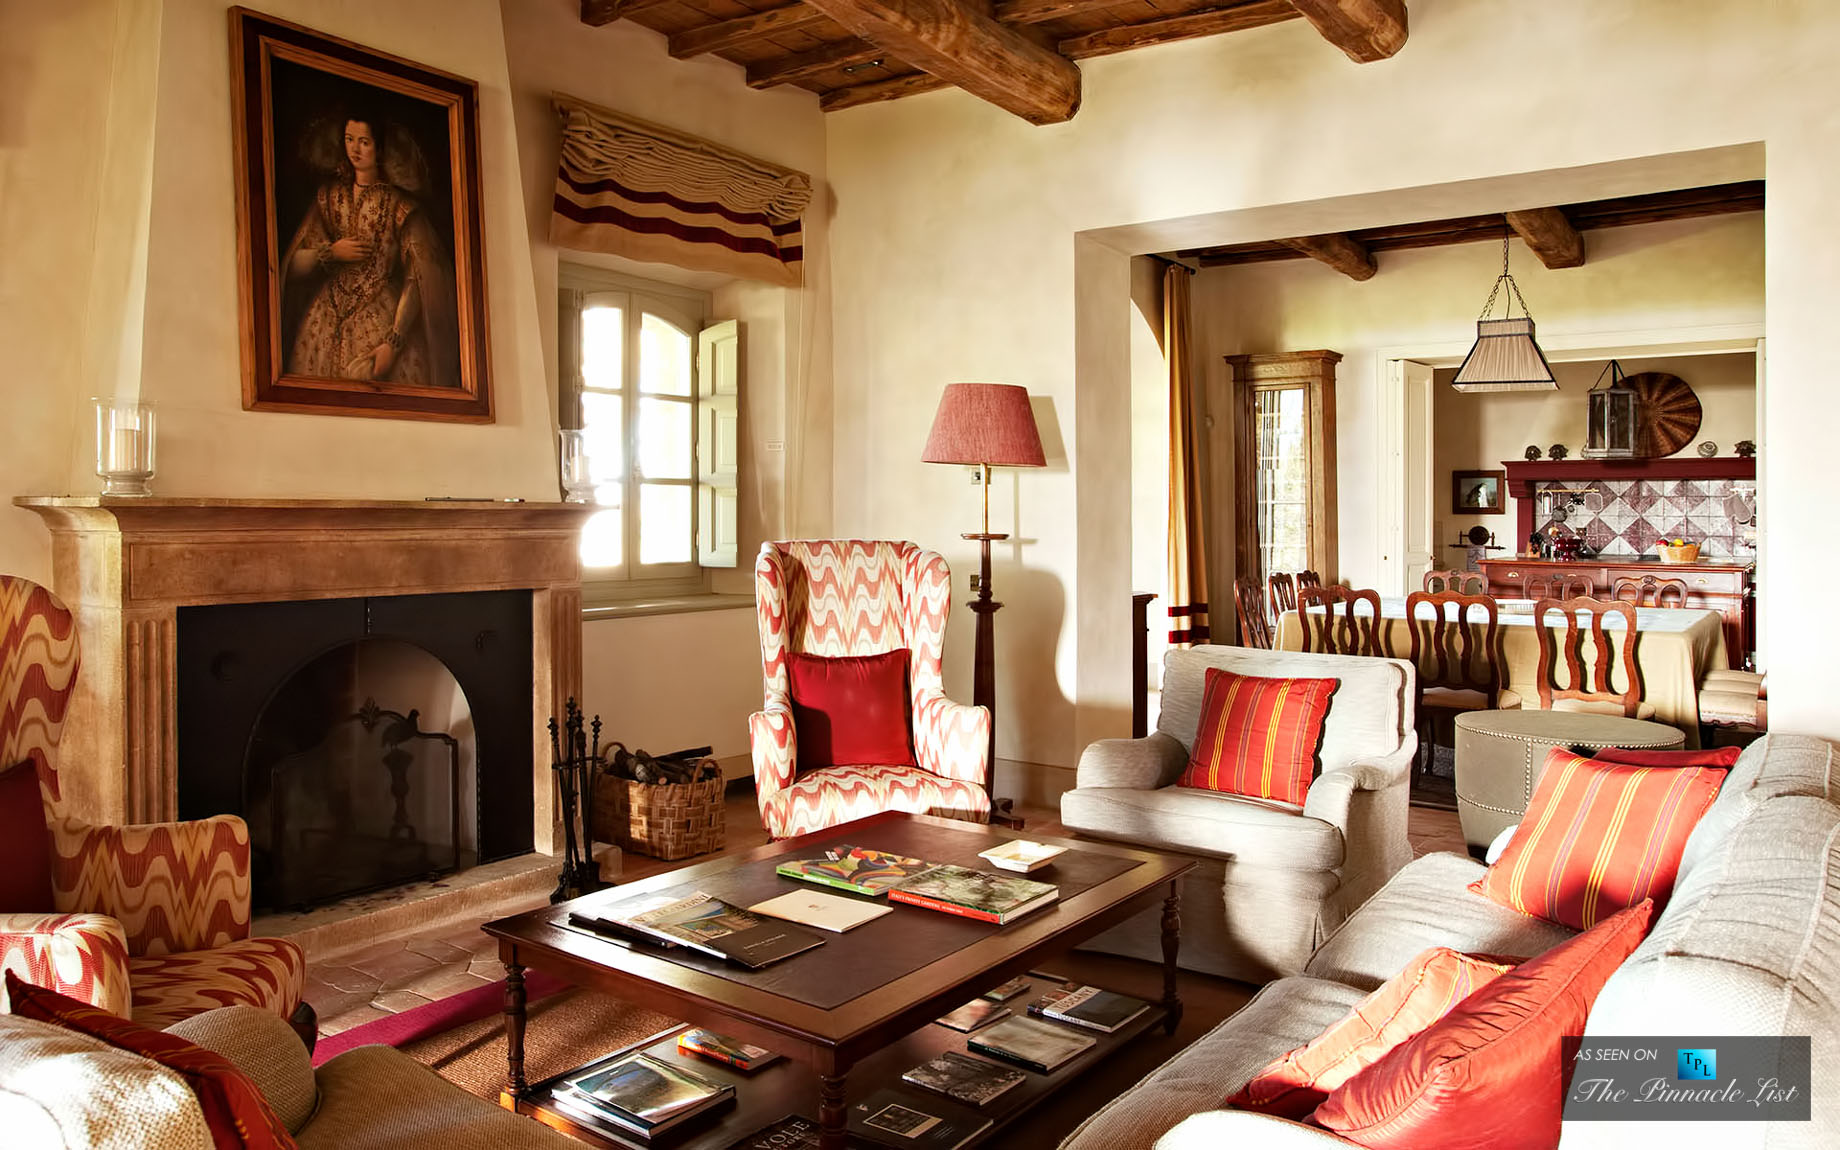 Casa Biondi – Tuscany, Italy – The 5 Best Rural Villas in the Mediterranean for Luxury Retreats